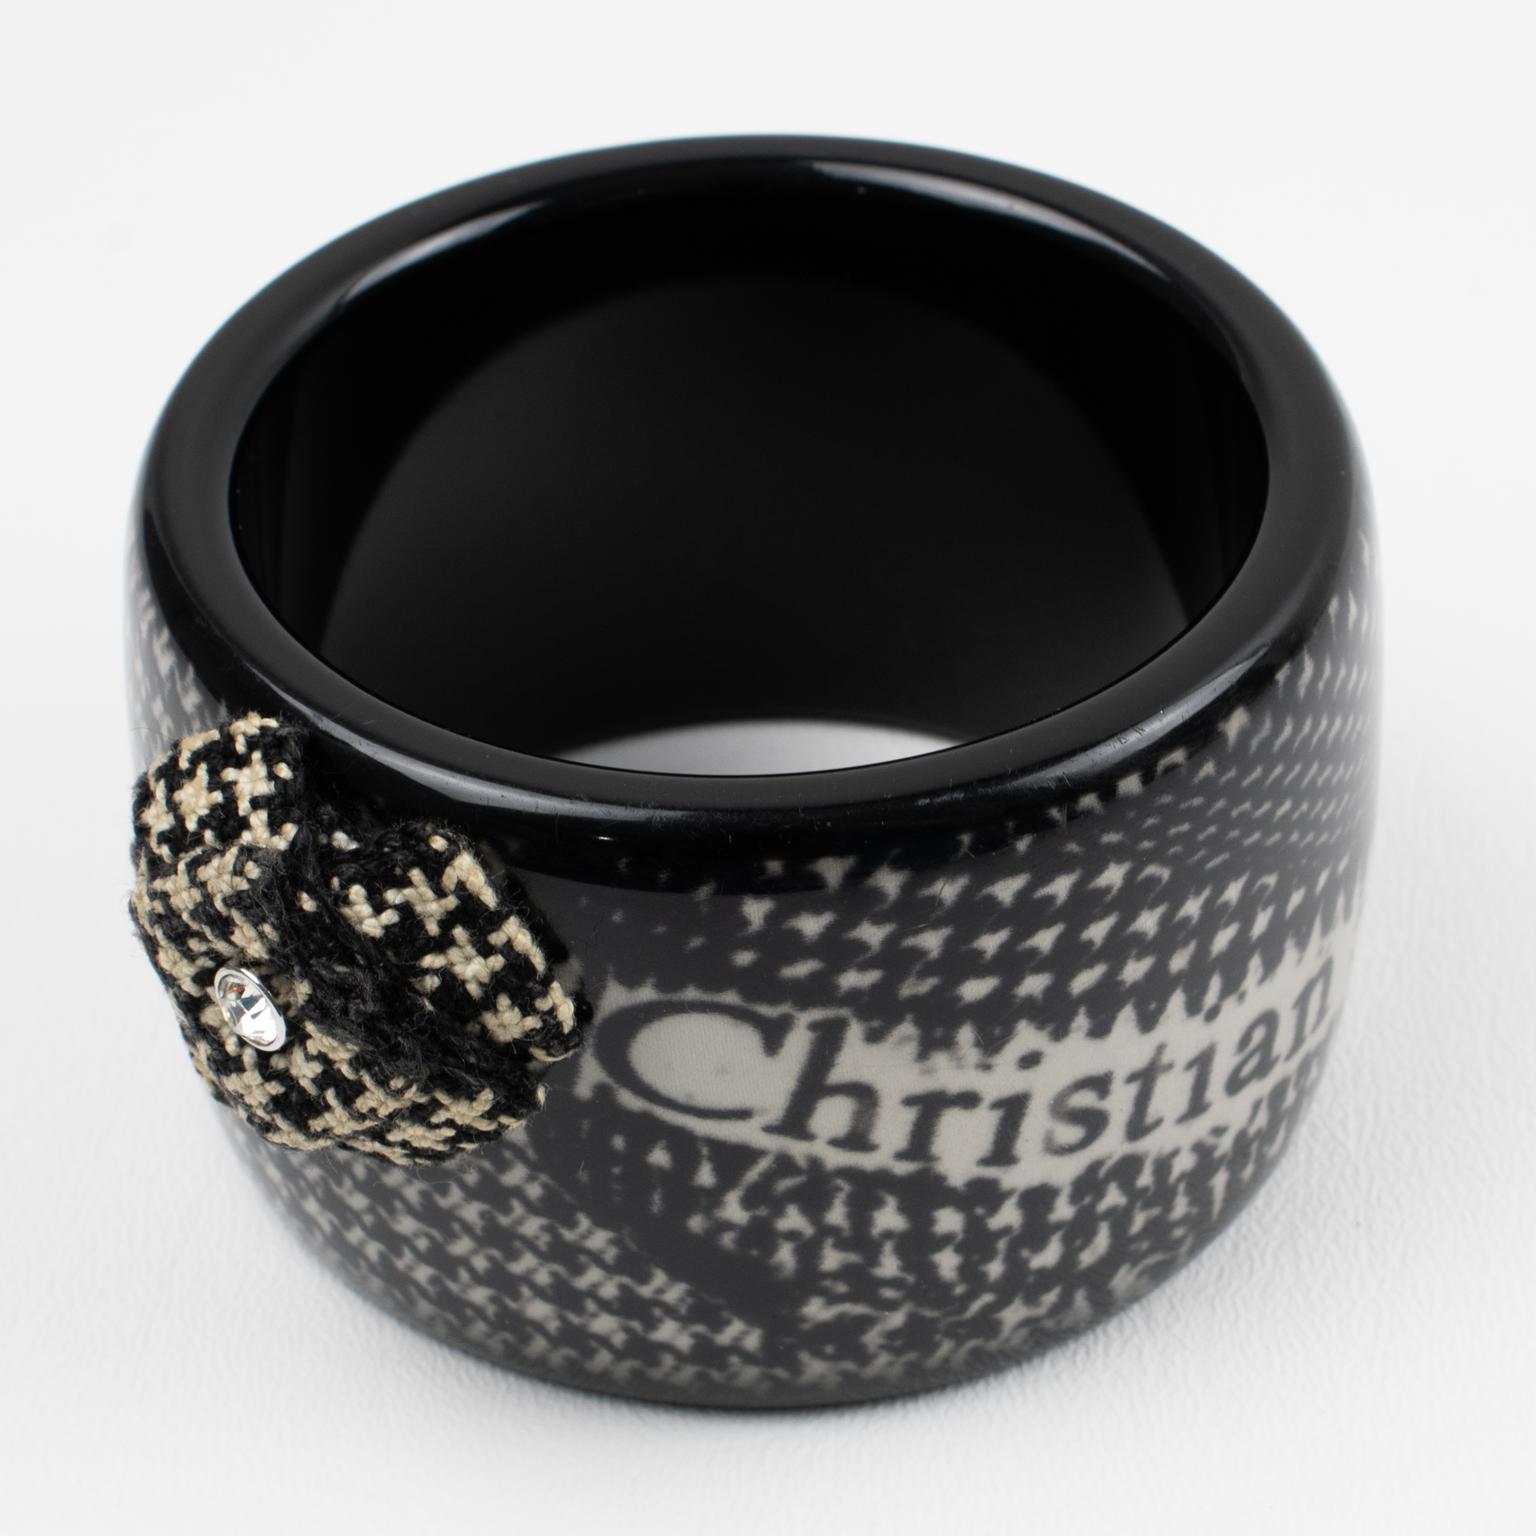 Decorated with a houndstooth print (Pied-de-Poule) and a logo print to the front, this bi-color bangle bracelet from Christian Dior is a bold fashion accessory. This black and white colored resin, acrylic, or Lucite bracelet boasts a lovely woven